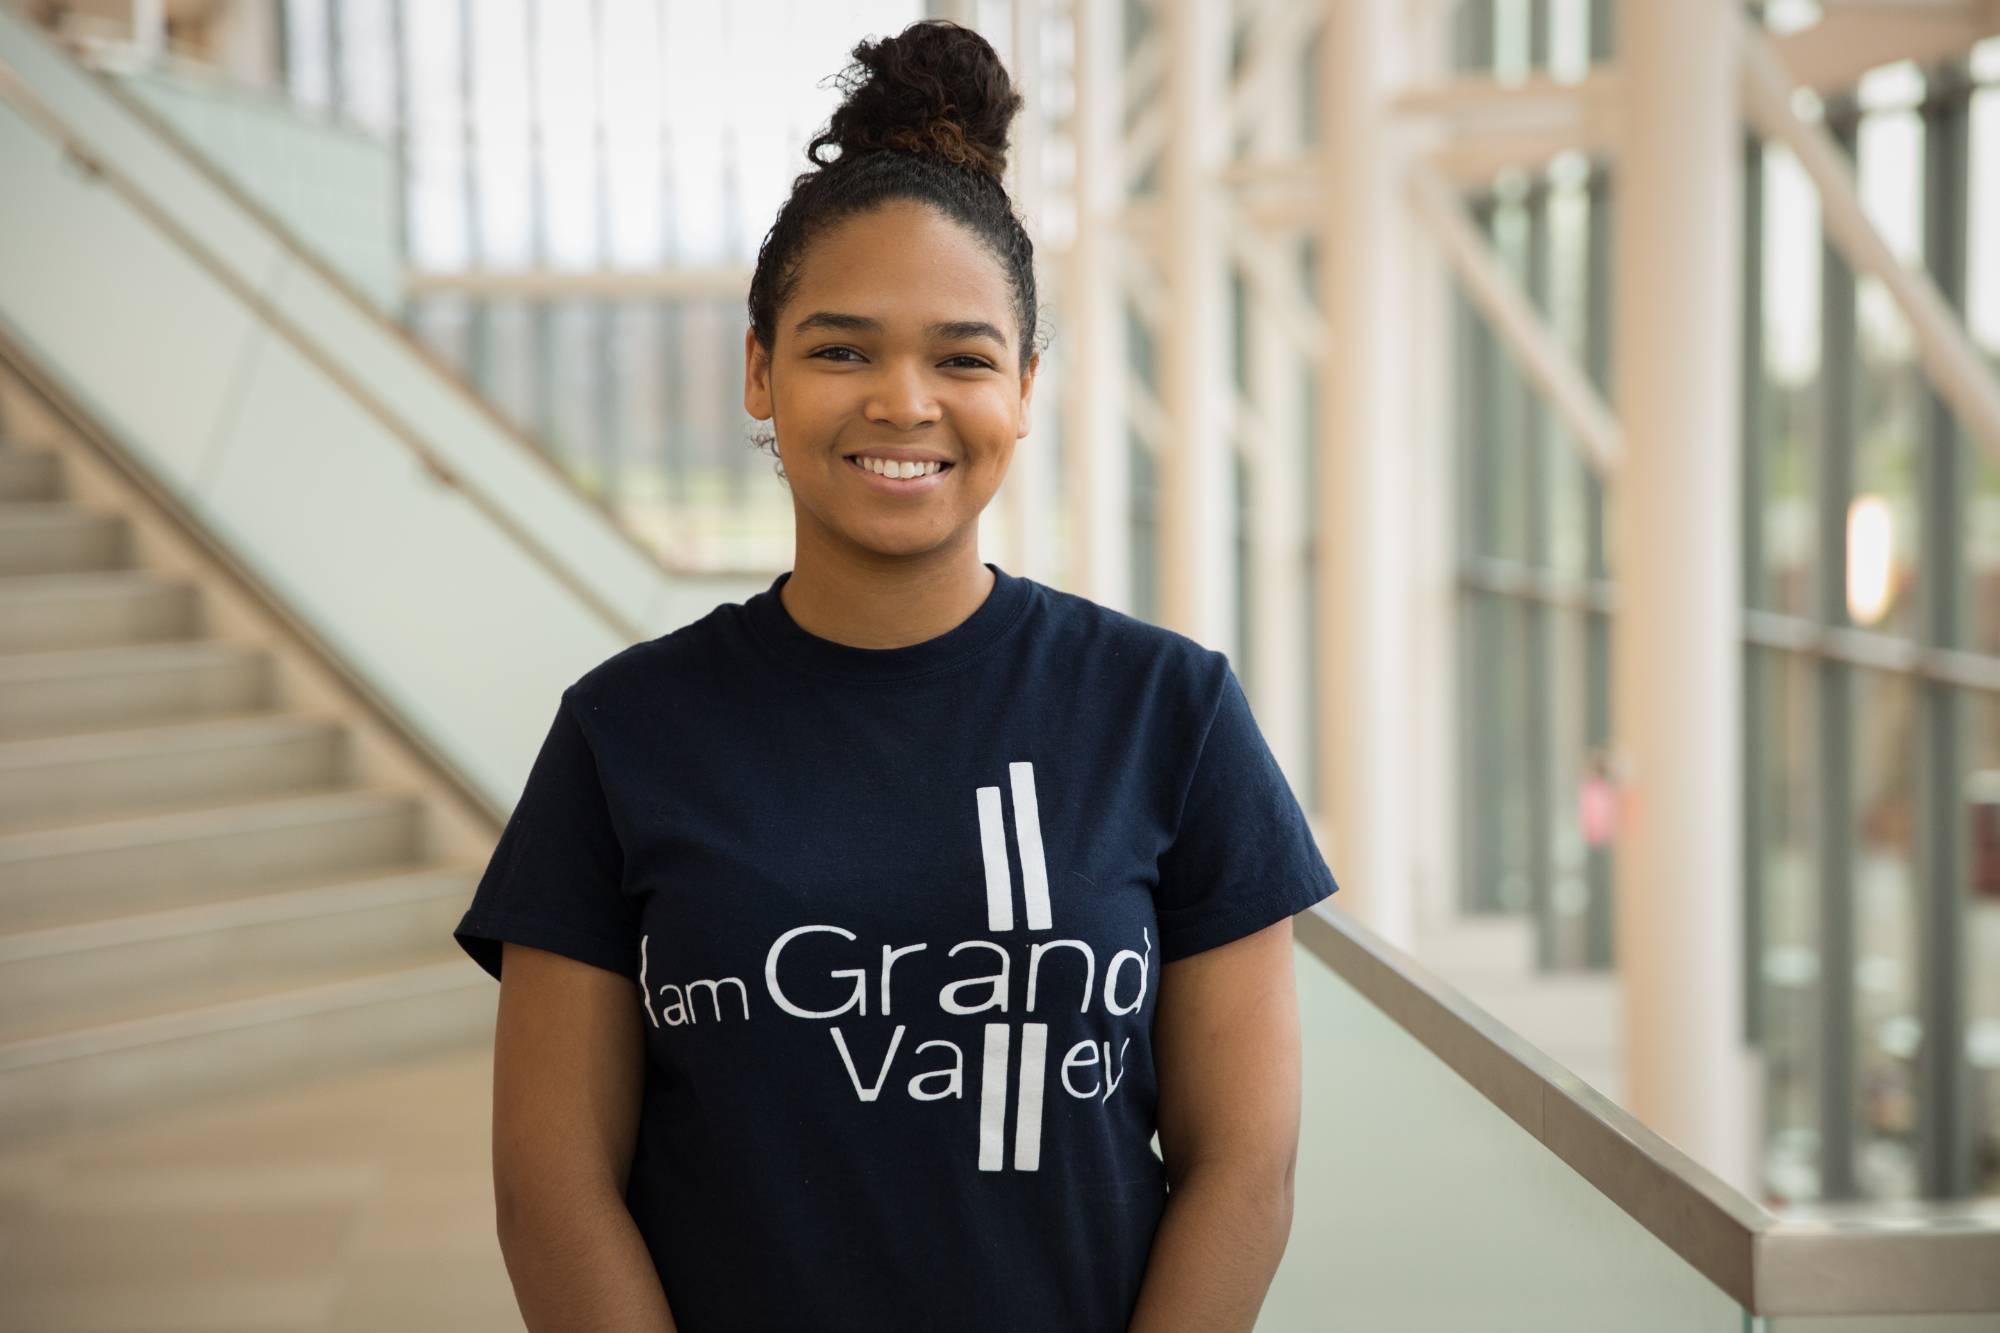 "I am Grand Valley" student recipient head-shot in Mary Idema Pew Library